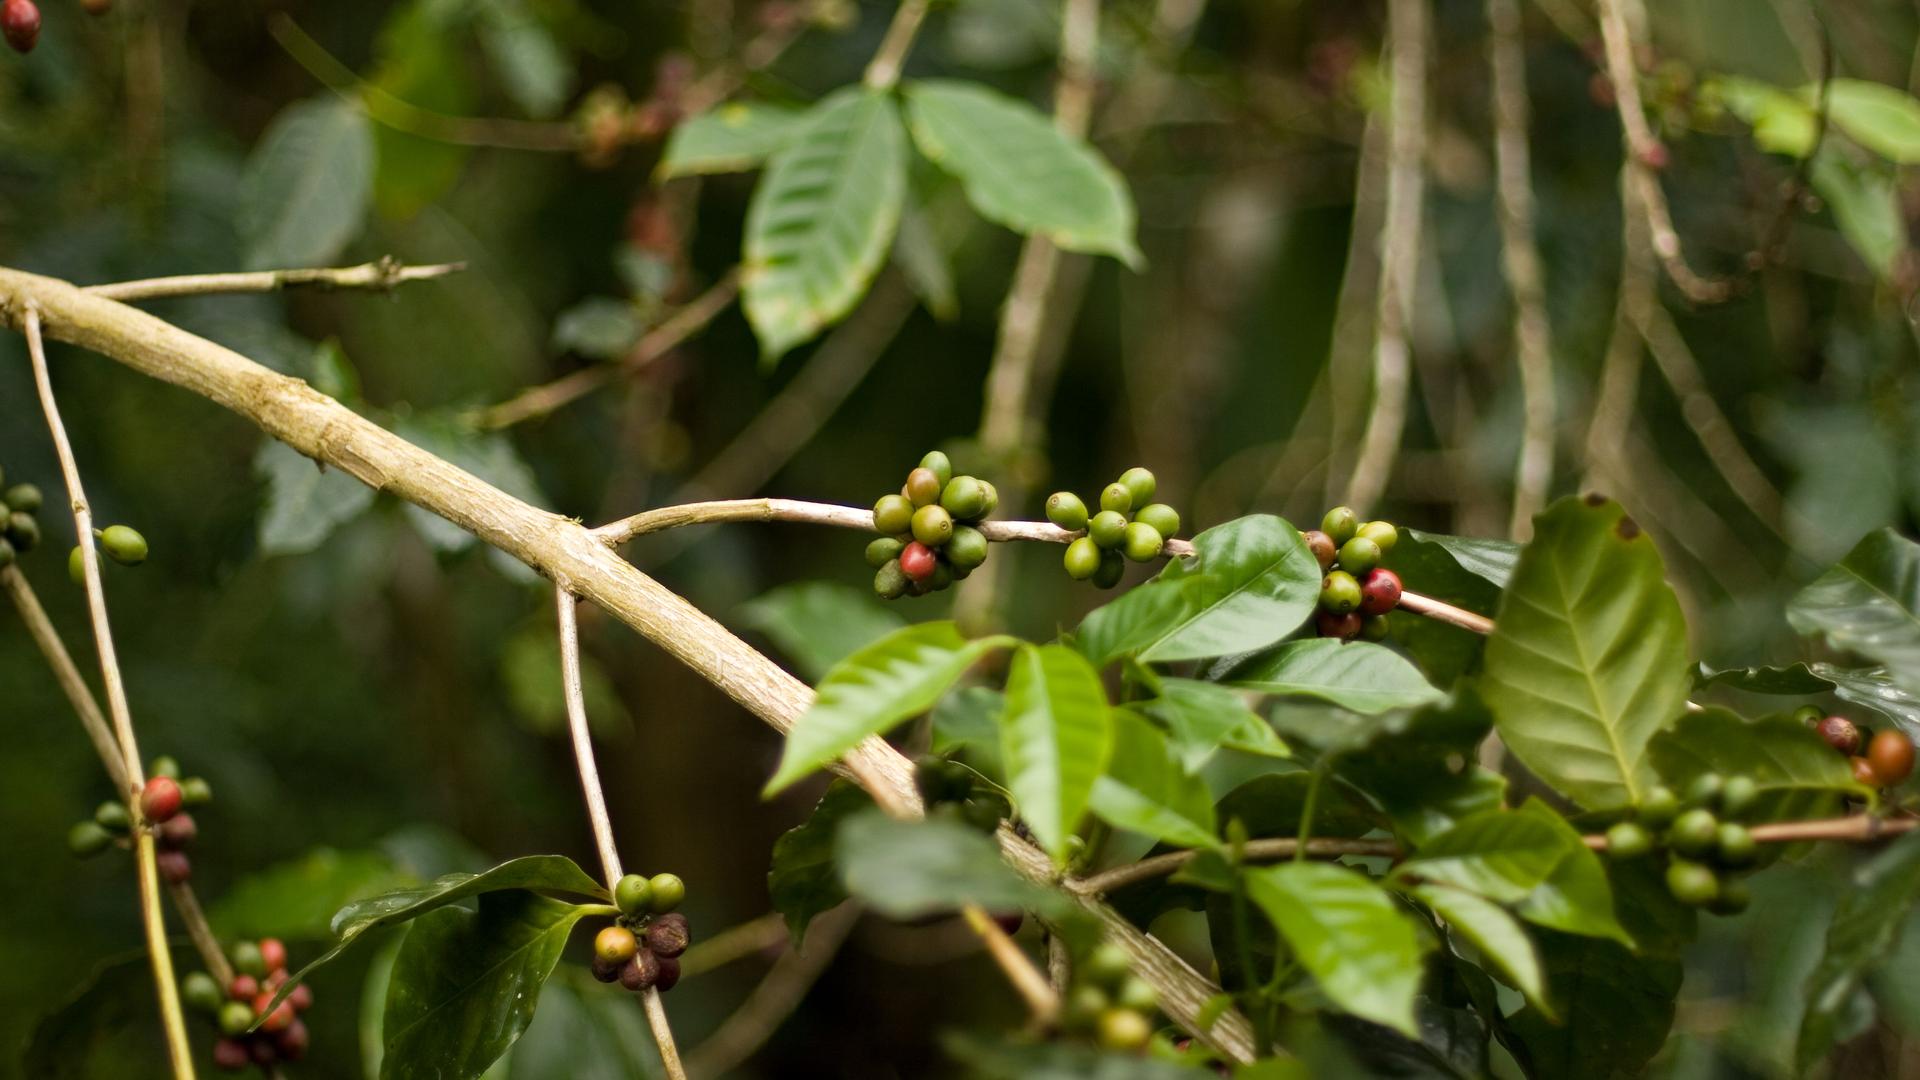 Conservationists hope building a market for local, shade-grown coffee could help restore vital but degraded scalesia forests on Santa Cruz Island, in the Galapagos.